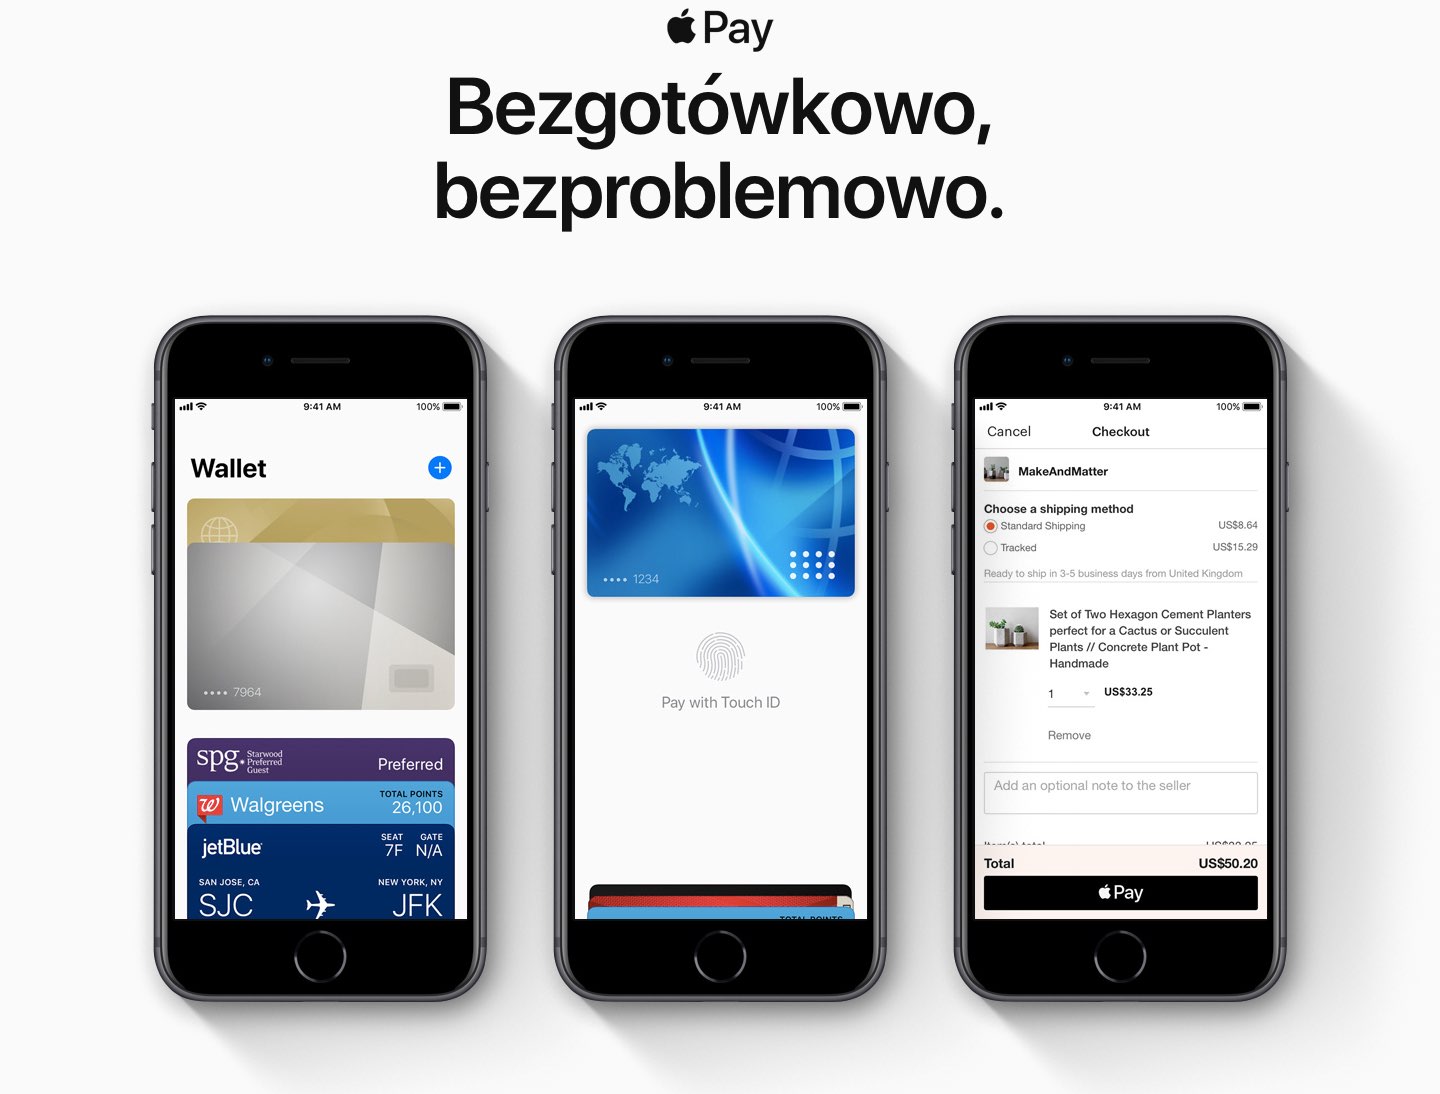 Apple Pay is now available in the 38.5 million people market of Poland